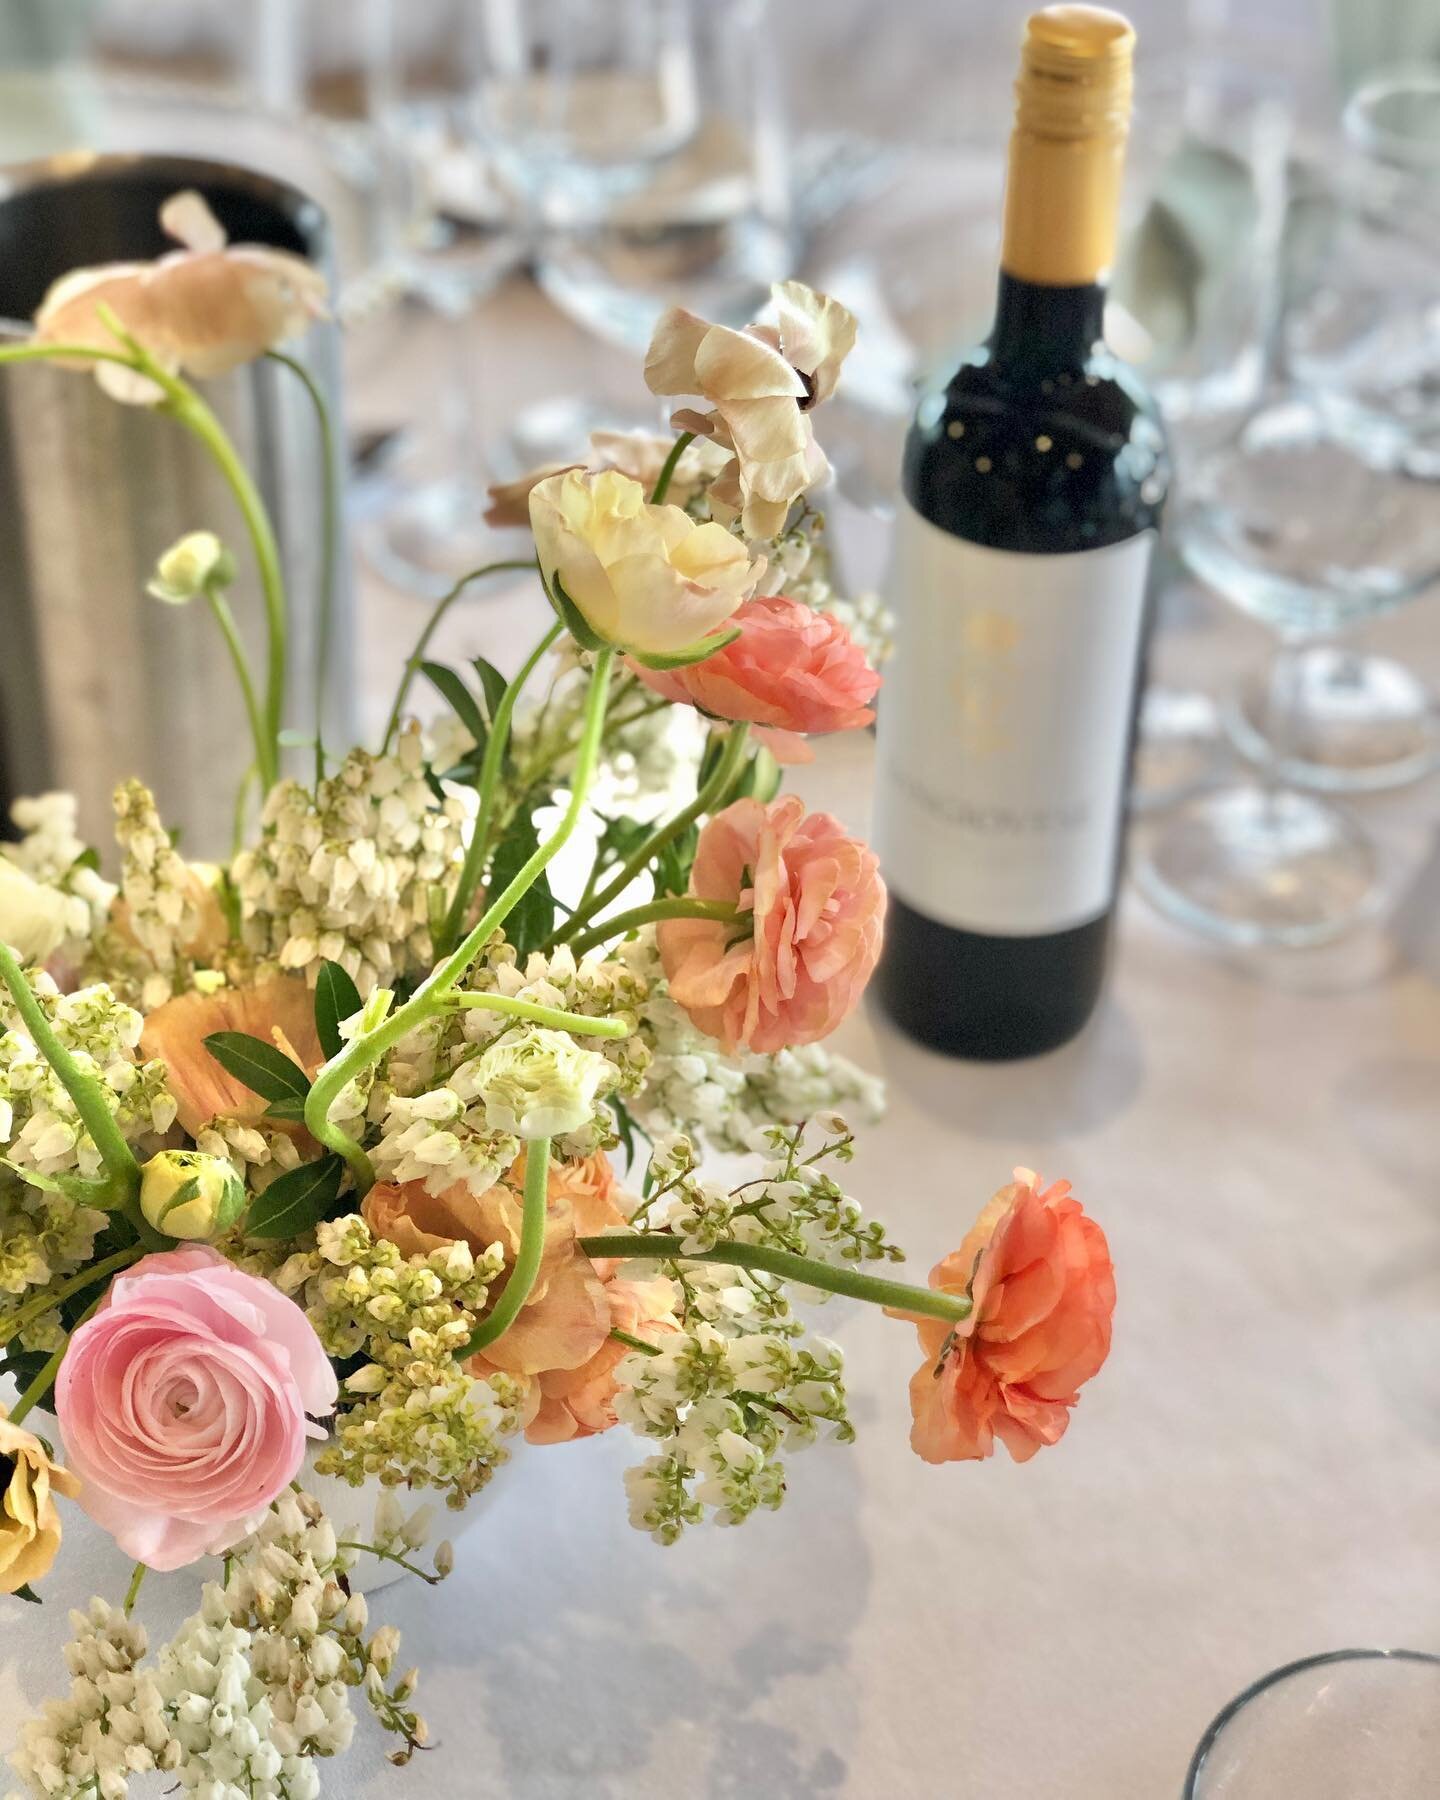 Flowers and wine, what a combo ✨
From Katie and Alex&rsquo;s wedding at @ravenswoodvenue 
.
.
.
.
#minimalistwedding #sussexflorist #londonflorist #floralstories #sussexwedding #stylingtheseasons #flowerstudio #sussexweddingflorist #weddinginspiratio